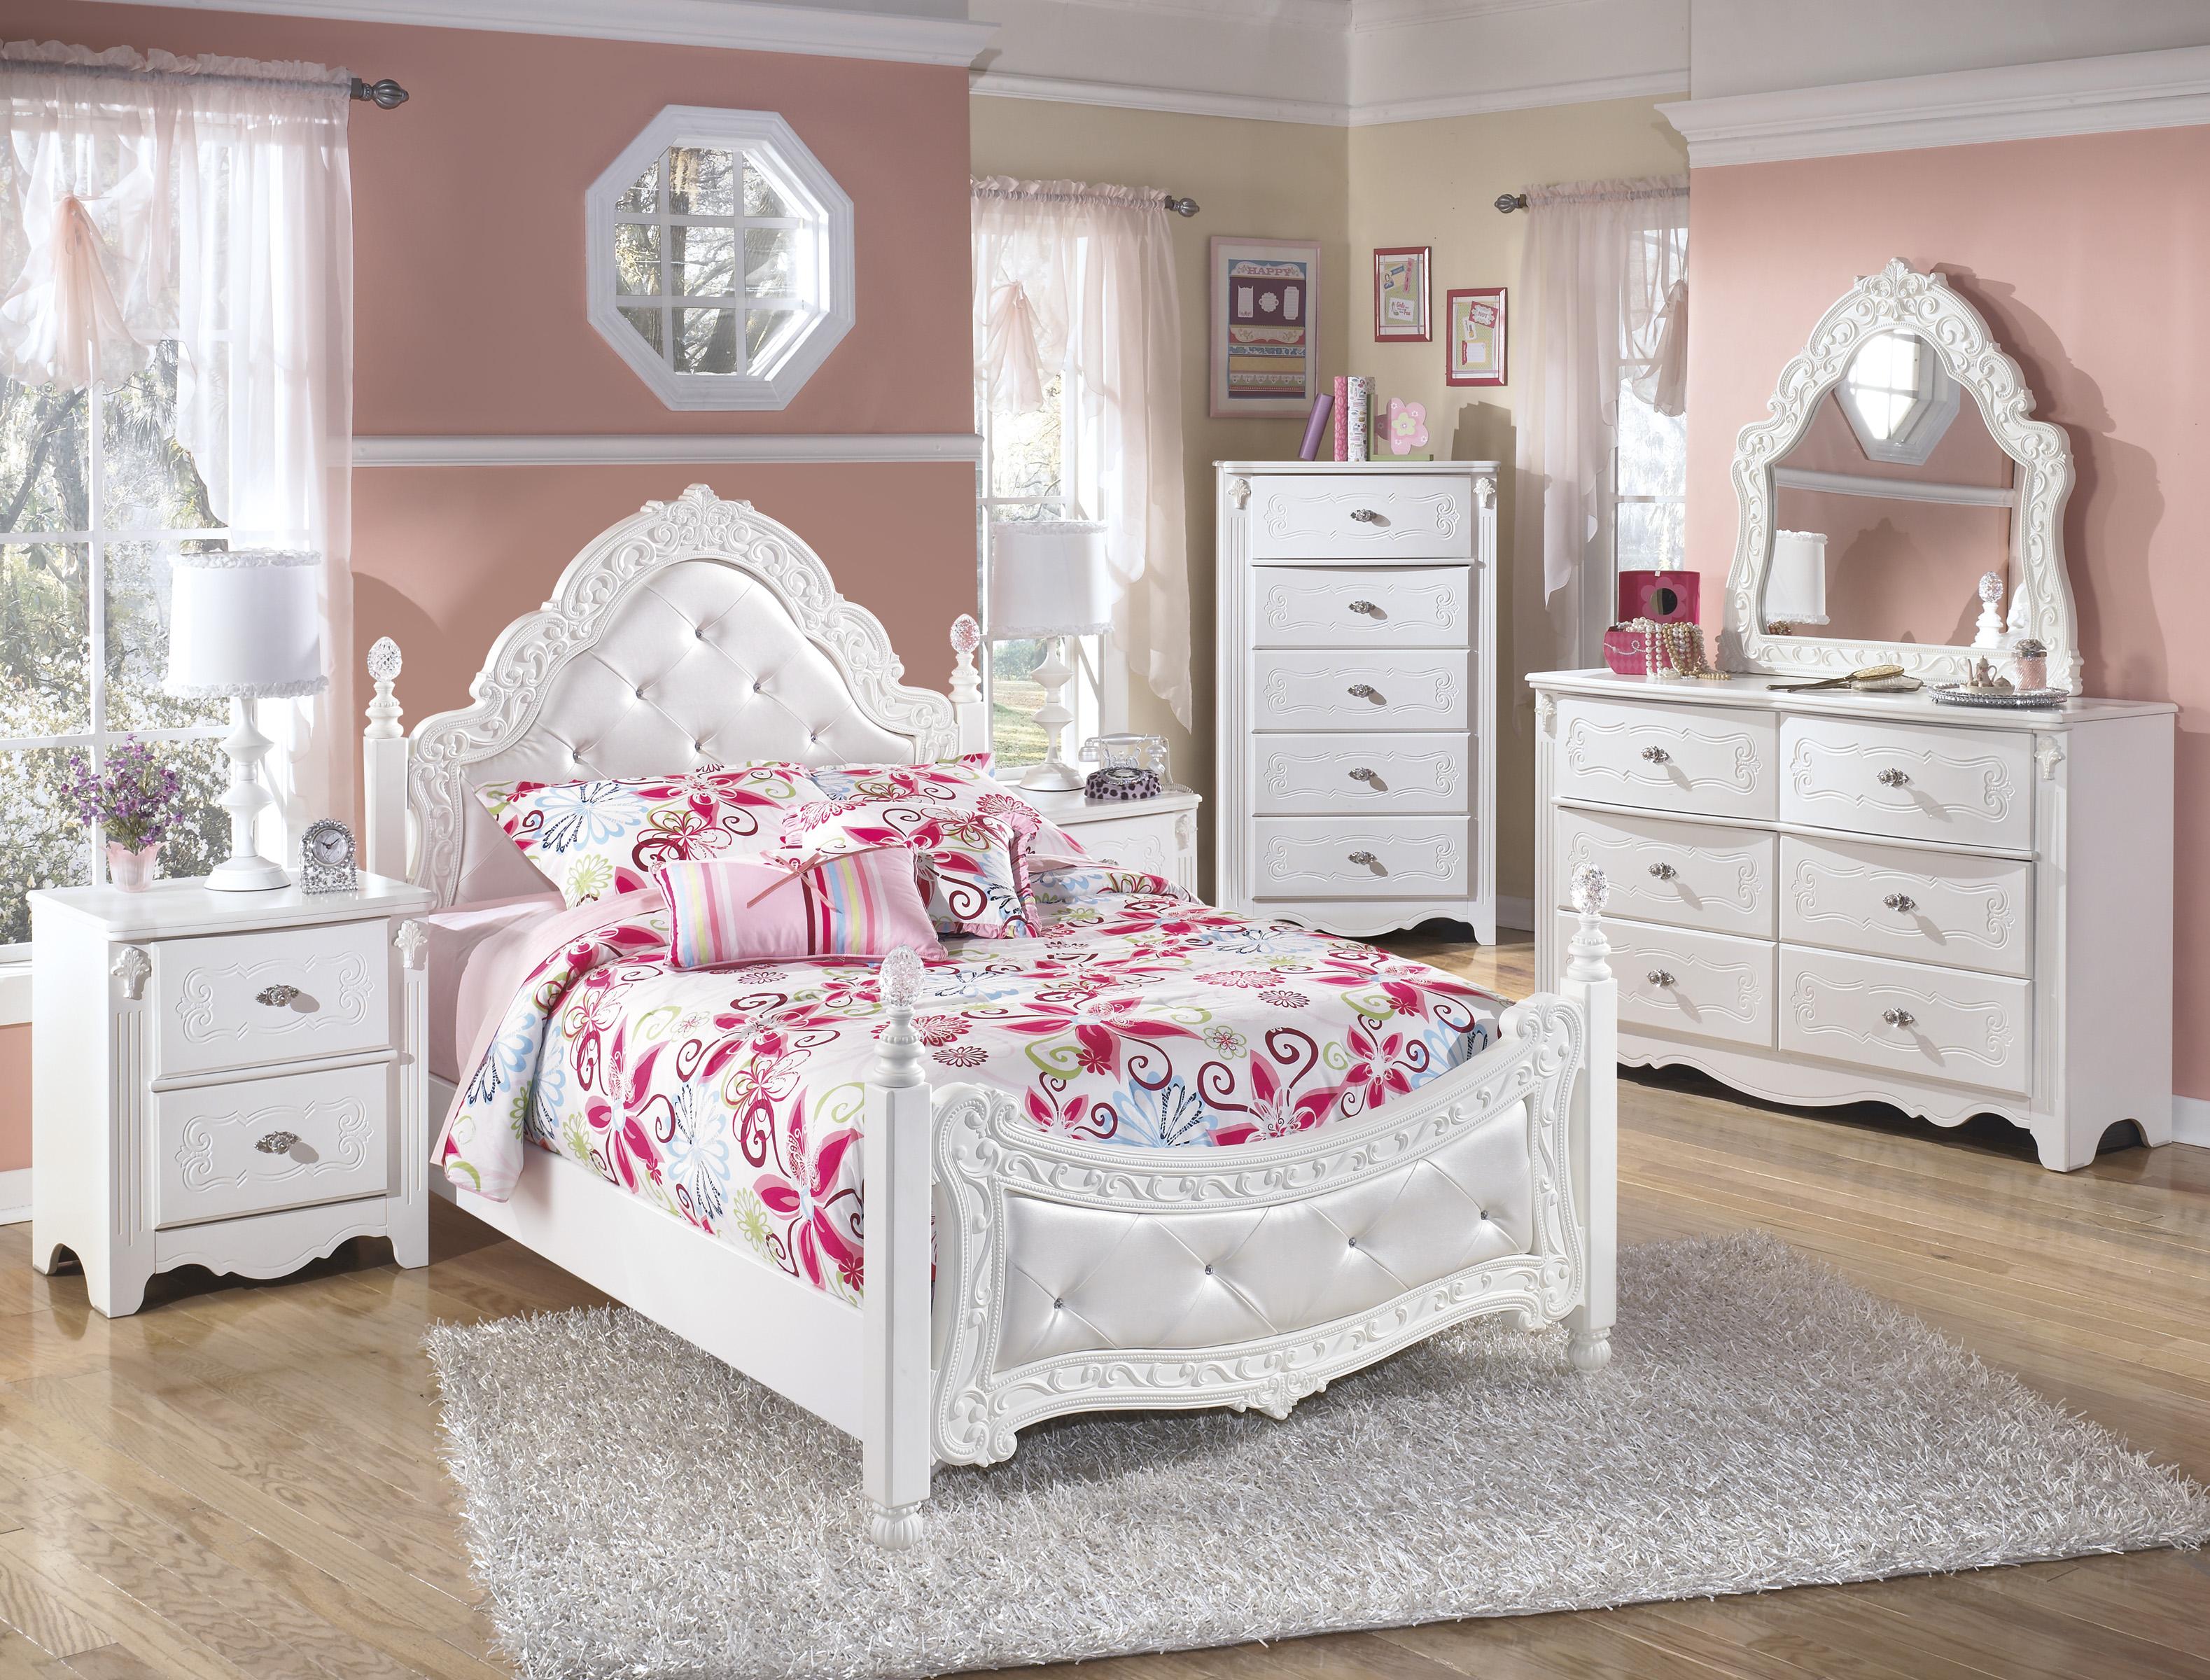 

    
Ashley Exquisite B188Y Full Size Poster Bedroom Set 6pcs in White
